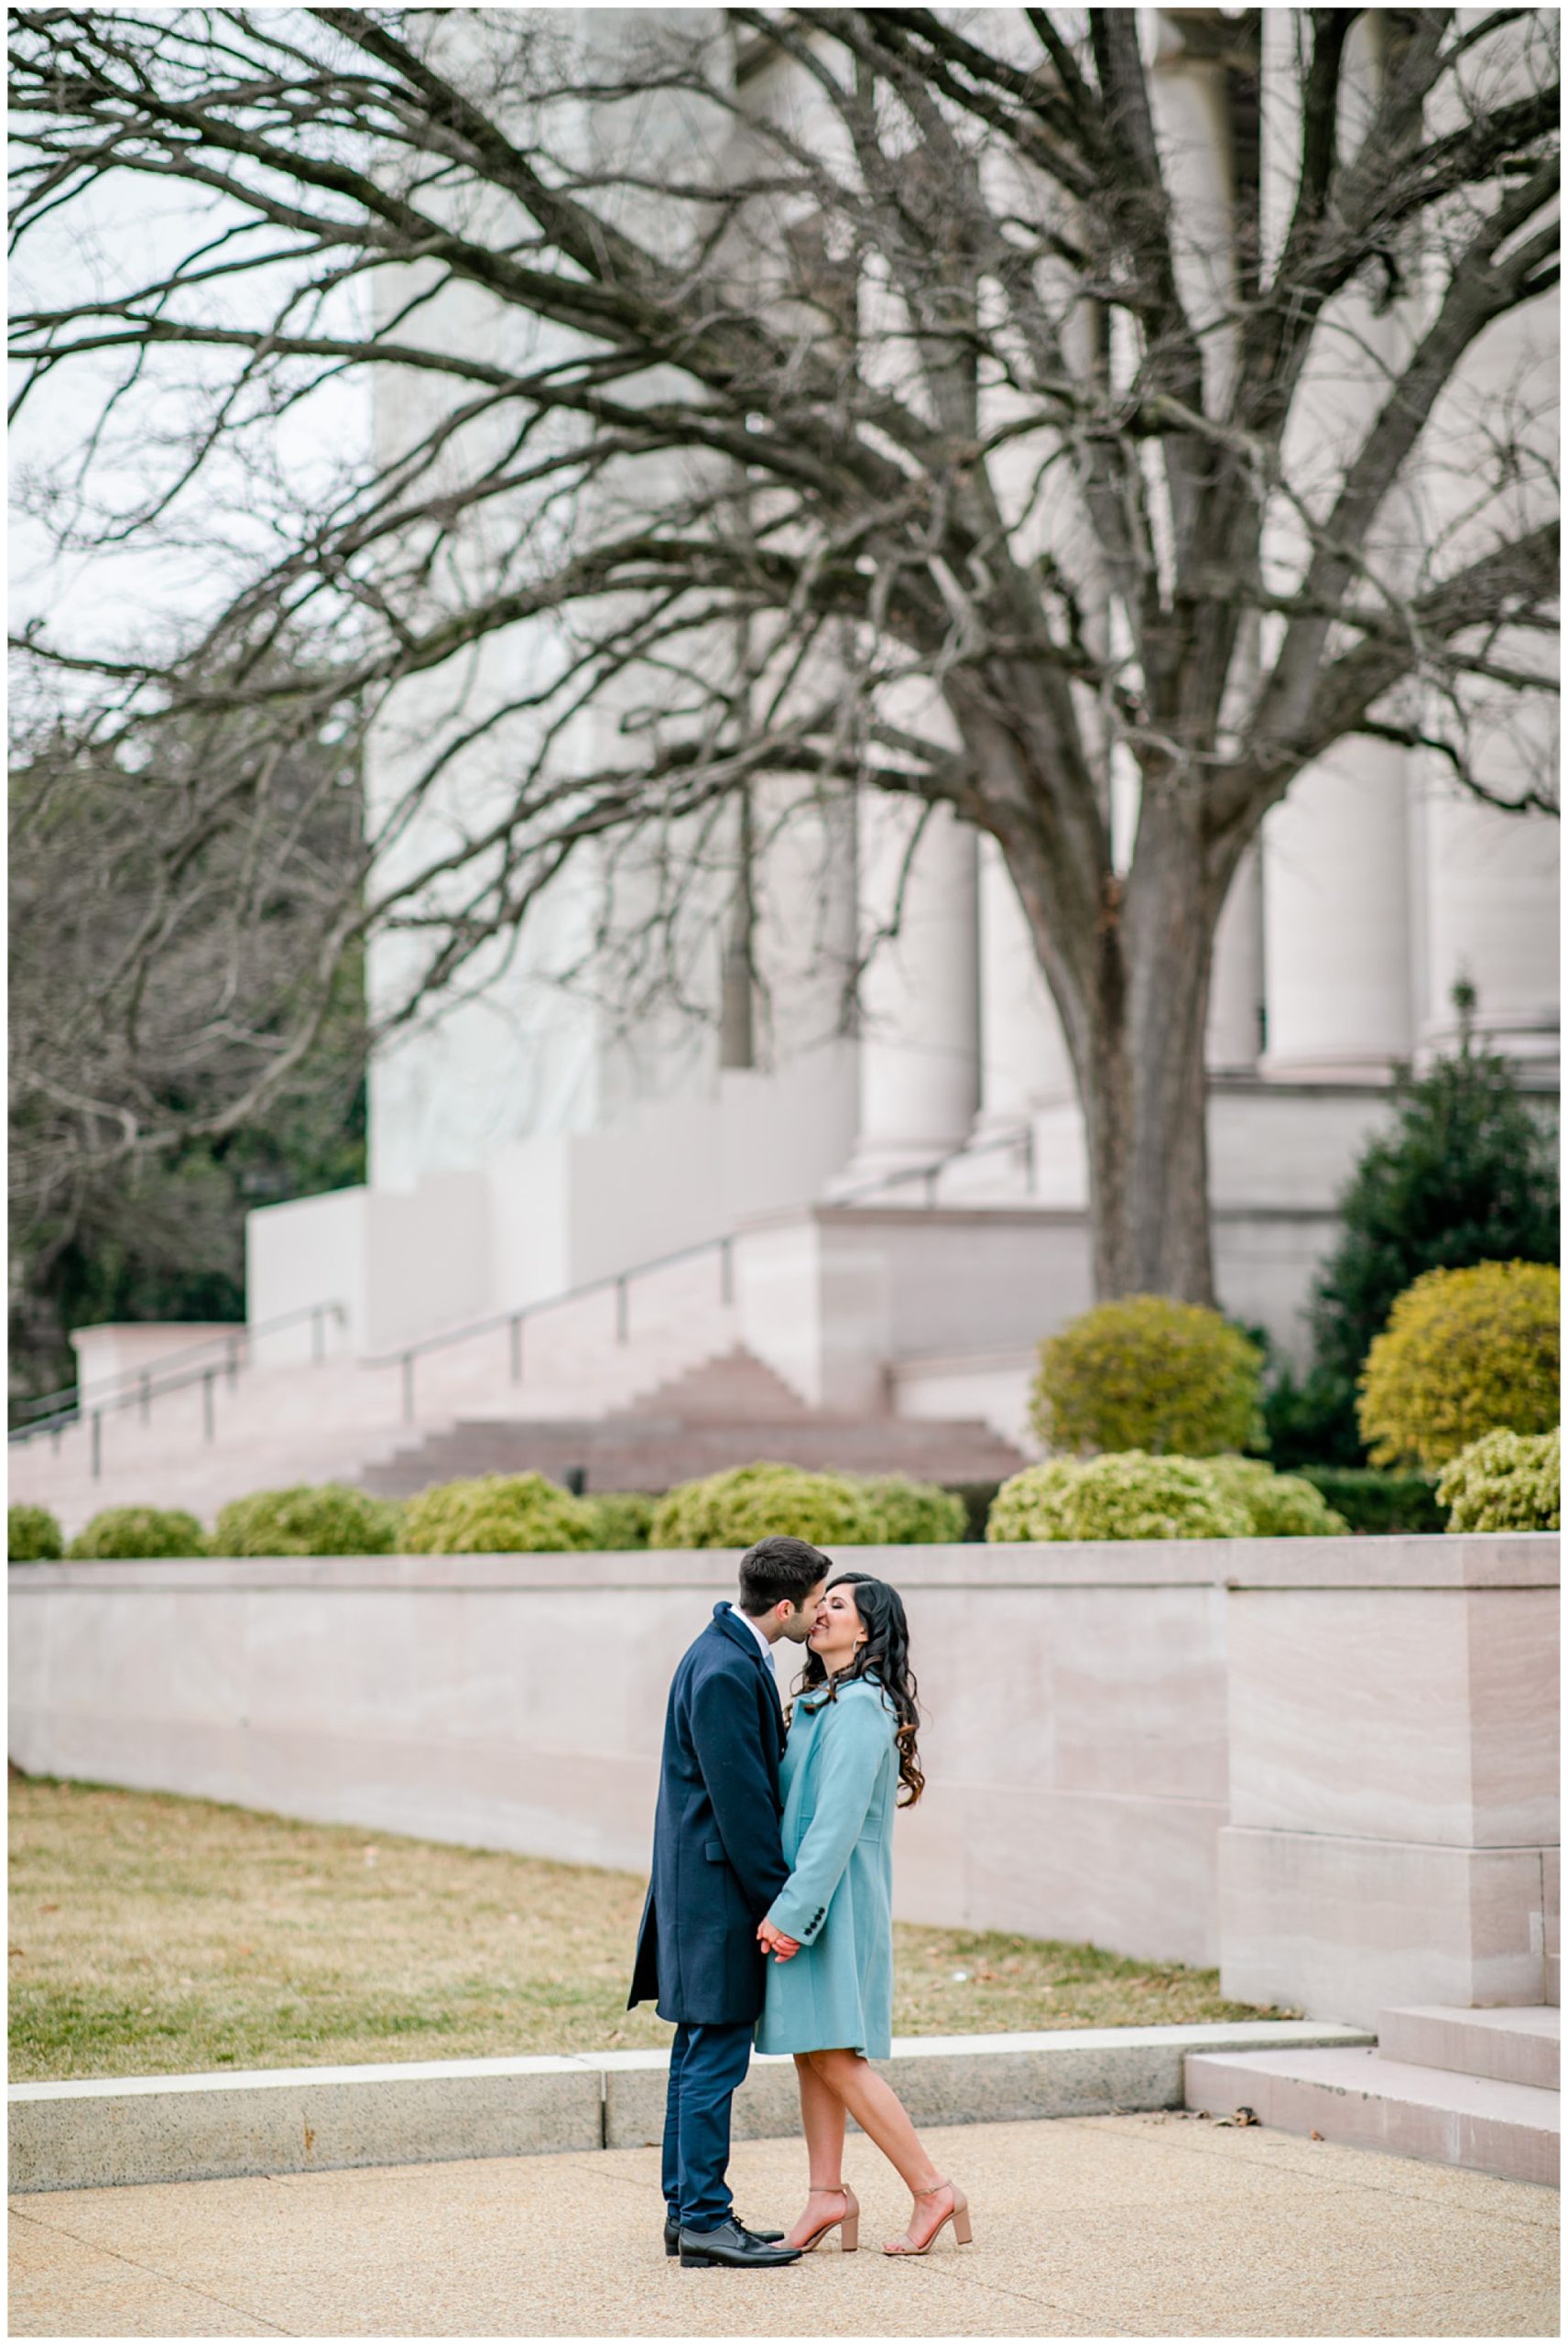 winter National Mall elopement, DC elopement, DC elopement photographer, DC wedding photographer, DC wedding portraits, National mall portraits, National Mall elopement, Rachel E.H. Photography, Capitol Hill, newlywed portraits, couple kissing, National Gallery of Art